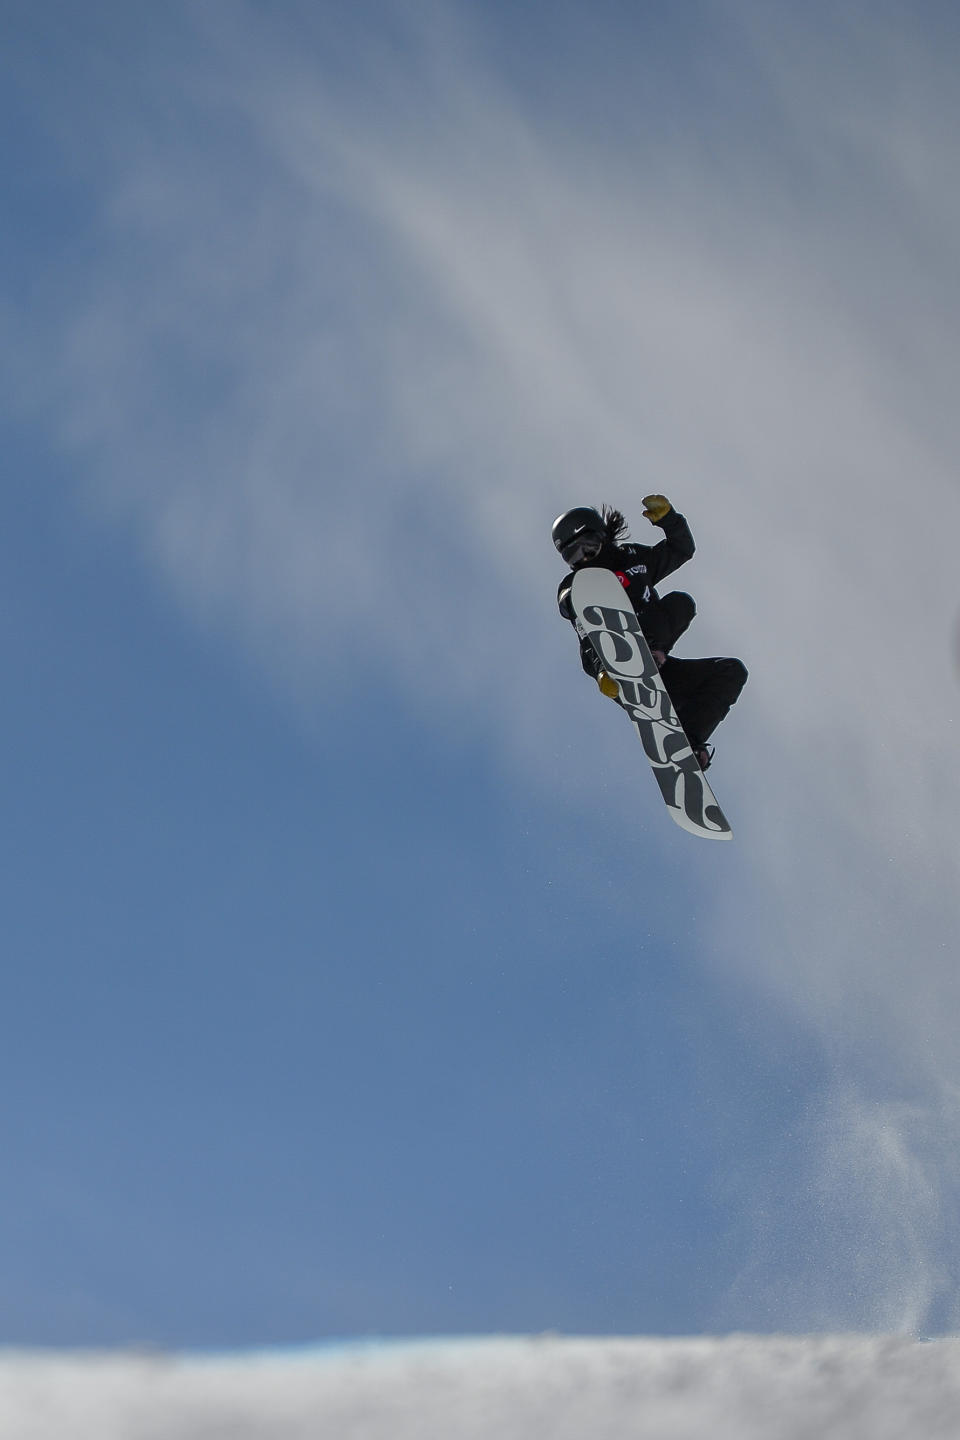 Xuetong Cai, of China, competes in the women's snowboard halfpipe final at the freestyle ski and snowboard world championships, Friday, Feb. 8, 2019, in Park City, Utah. (AP Photo/Alex Goodlett)